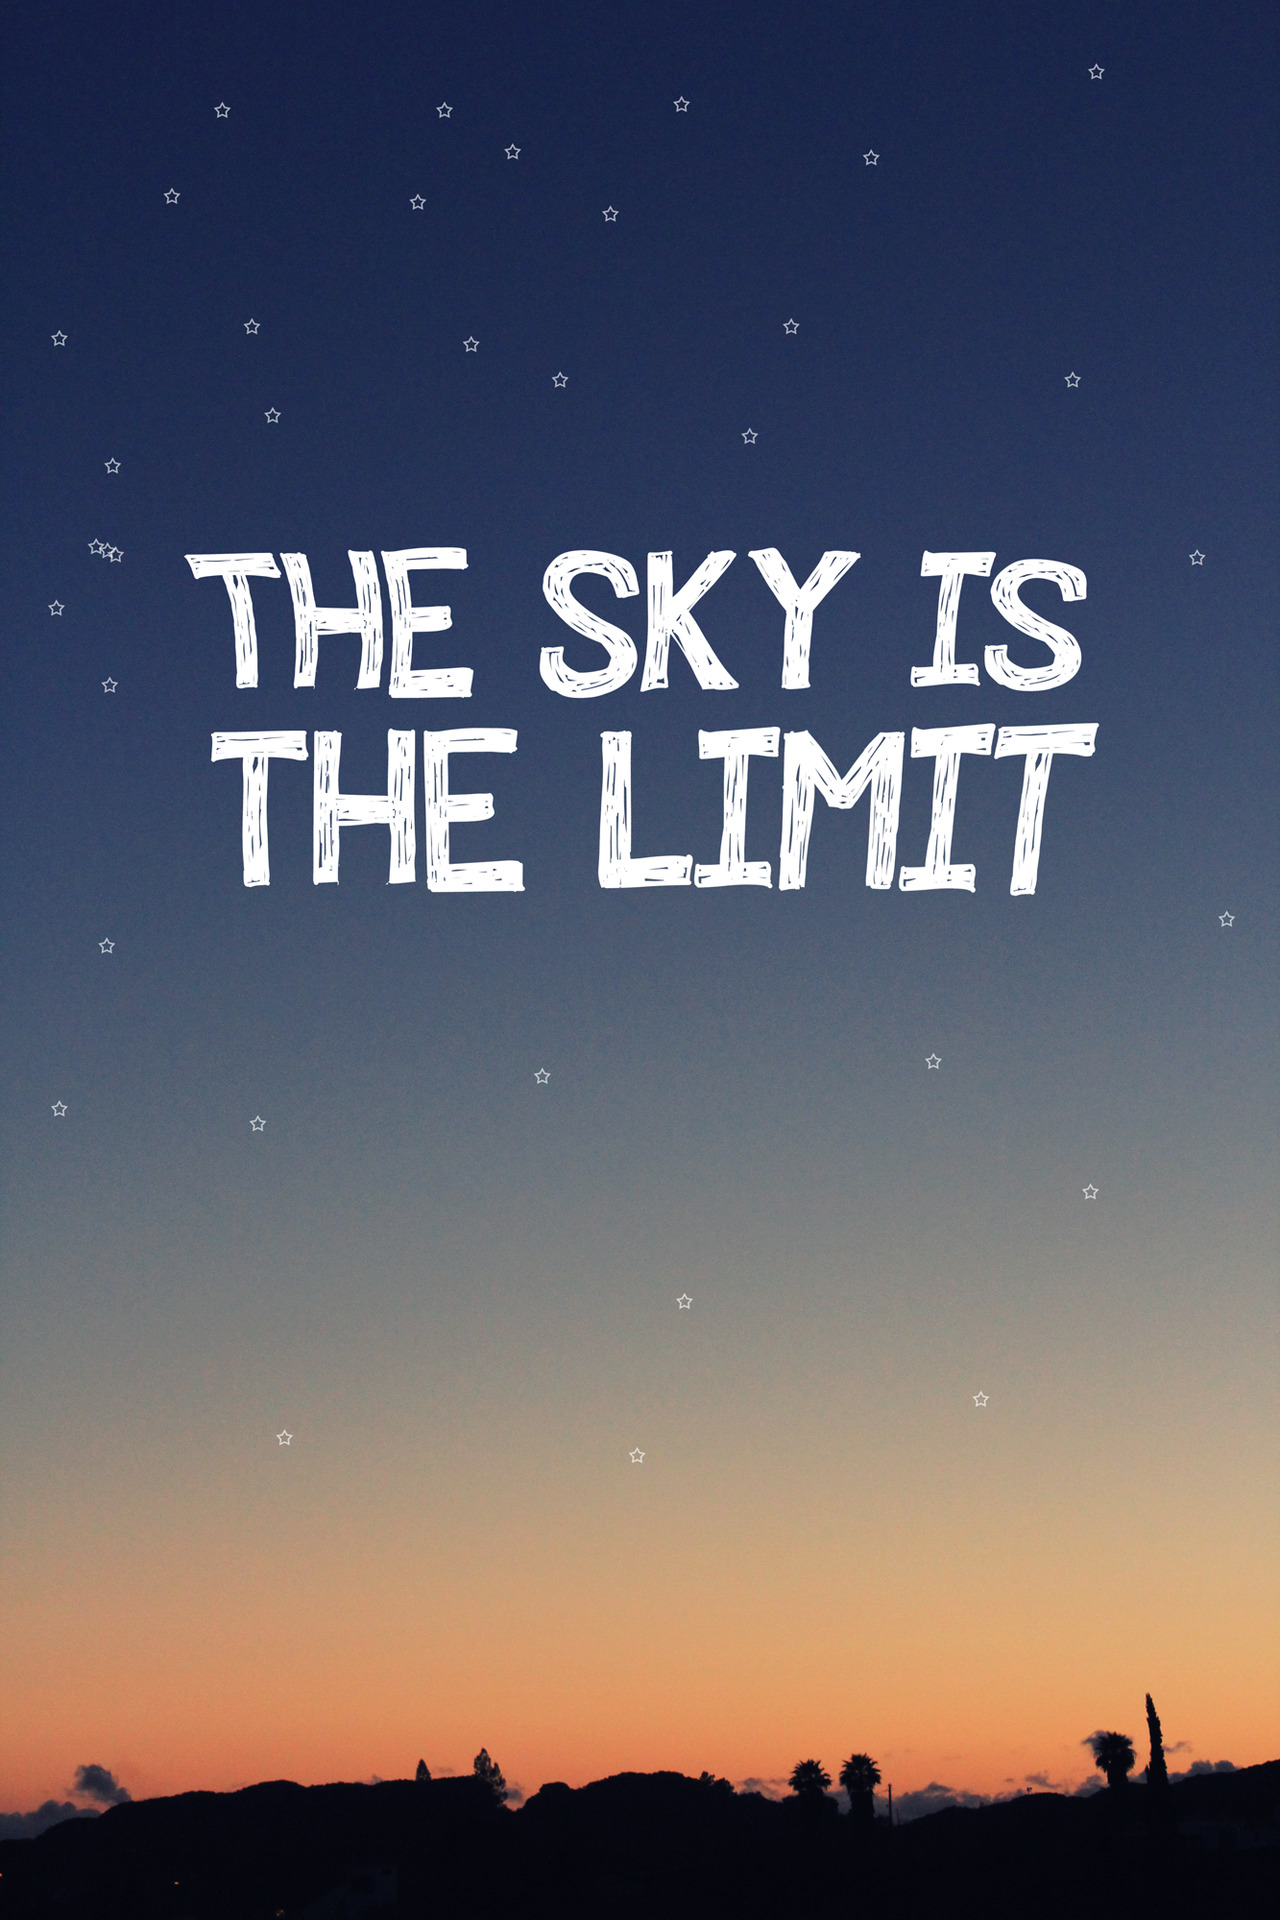 Ис небо. The Sky is the limit. Limits of Sky. The only limit is Sky. The Sky is the limit тату.